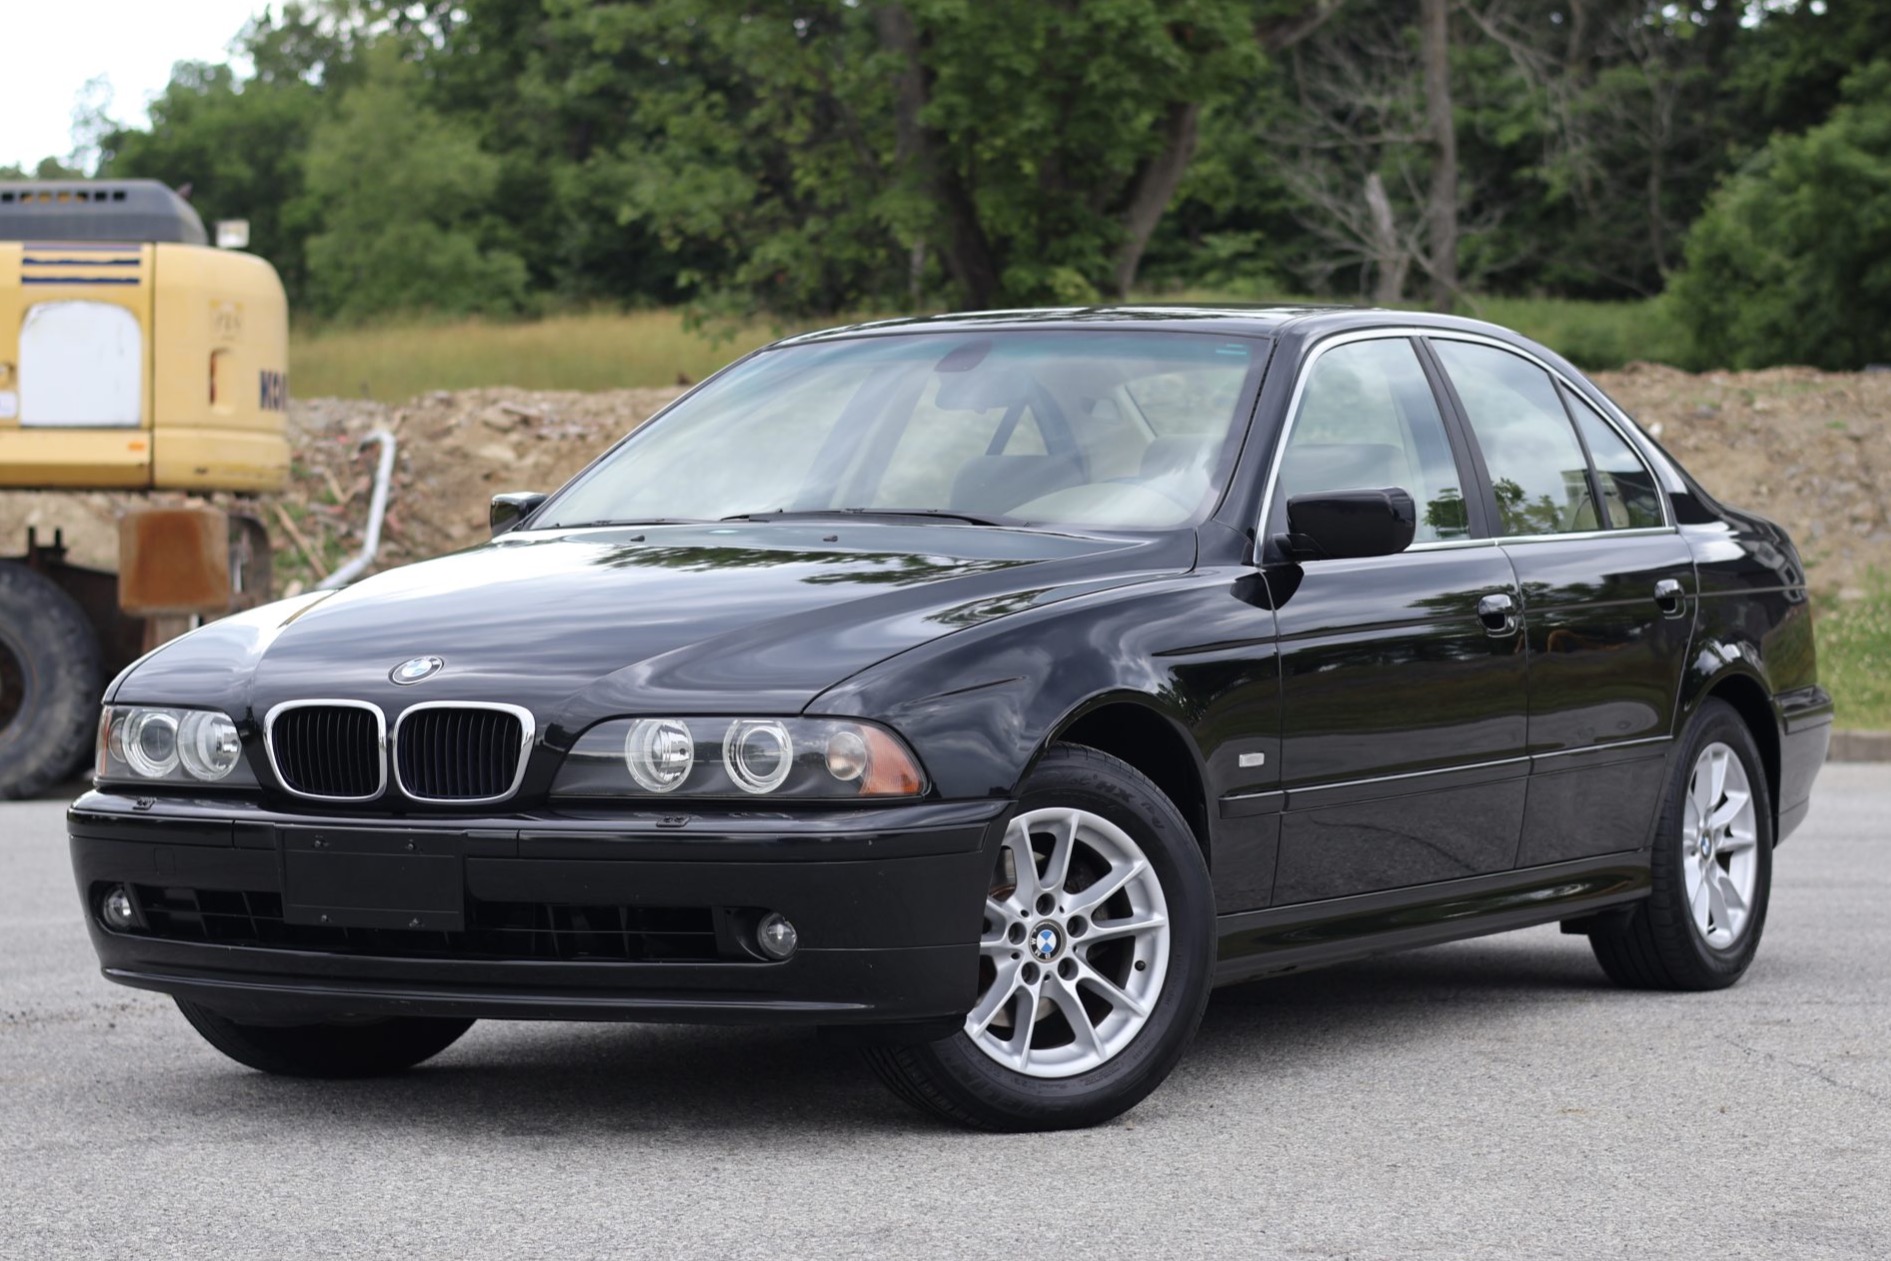 Used 2003 BMW 525i Review